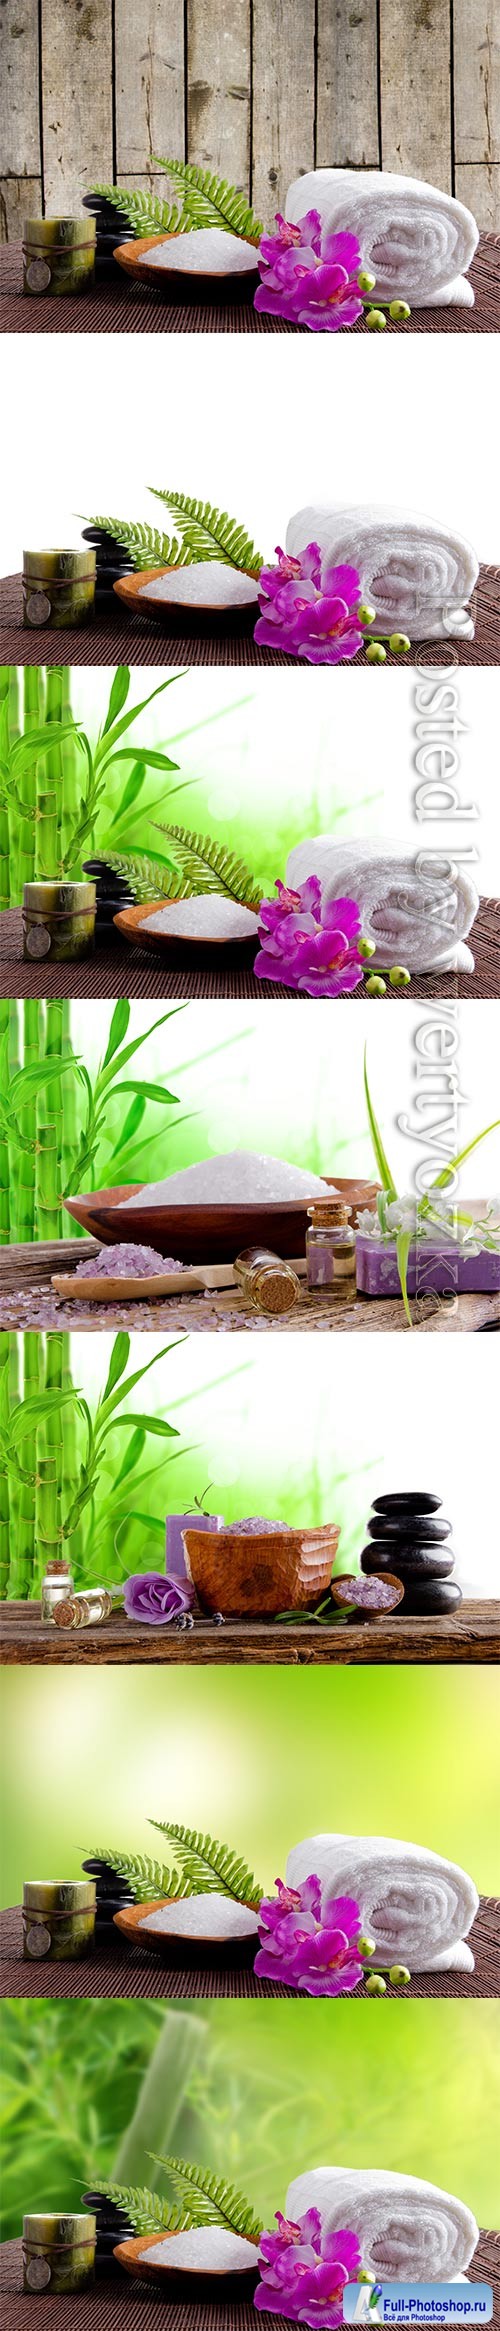 Spa backgrounds with bamboo branches, spa stones and orchids